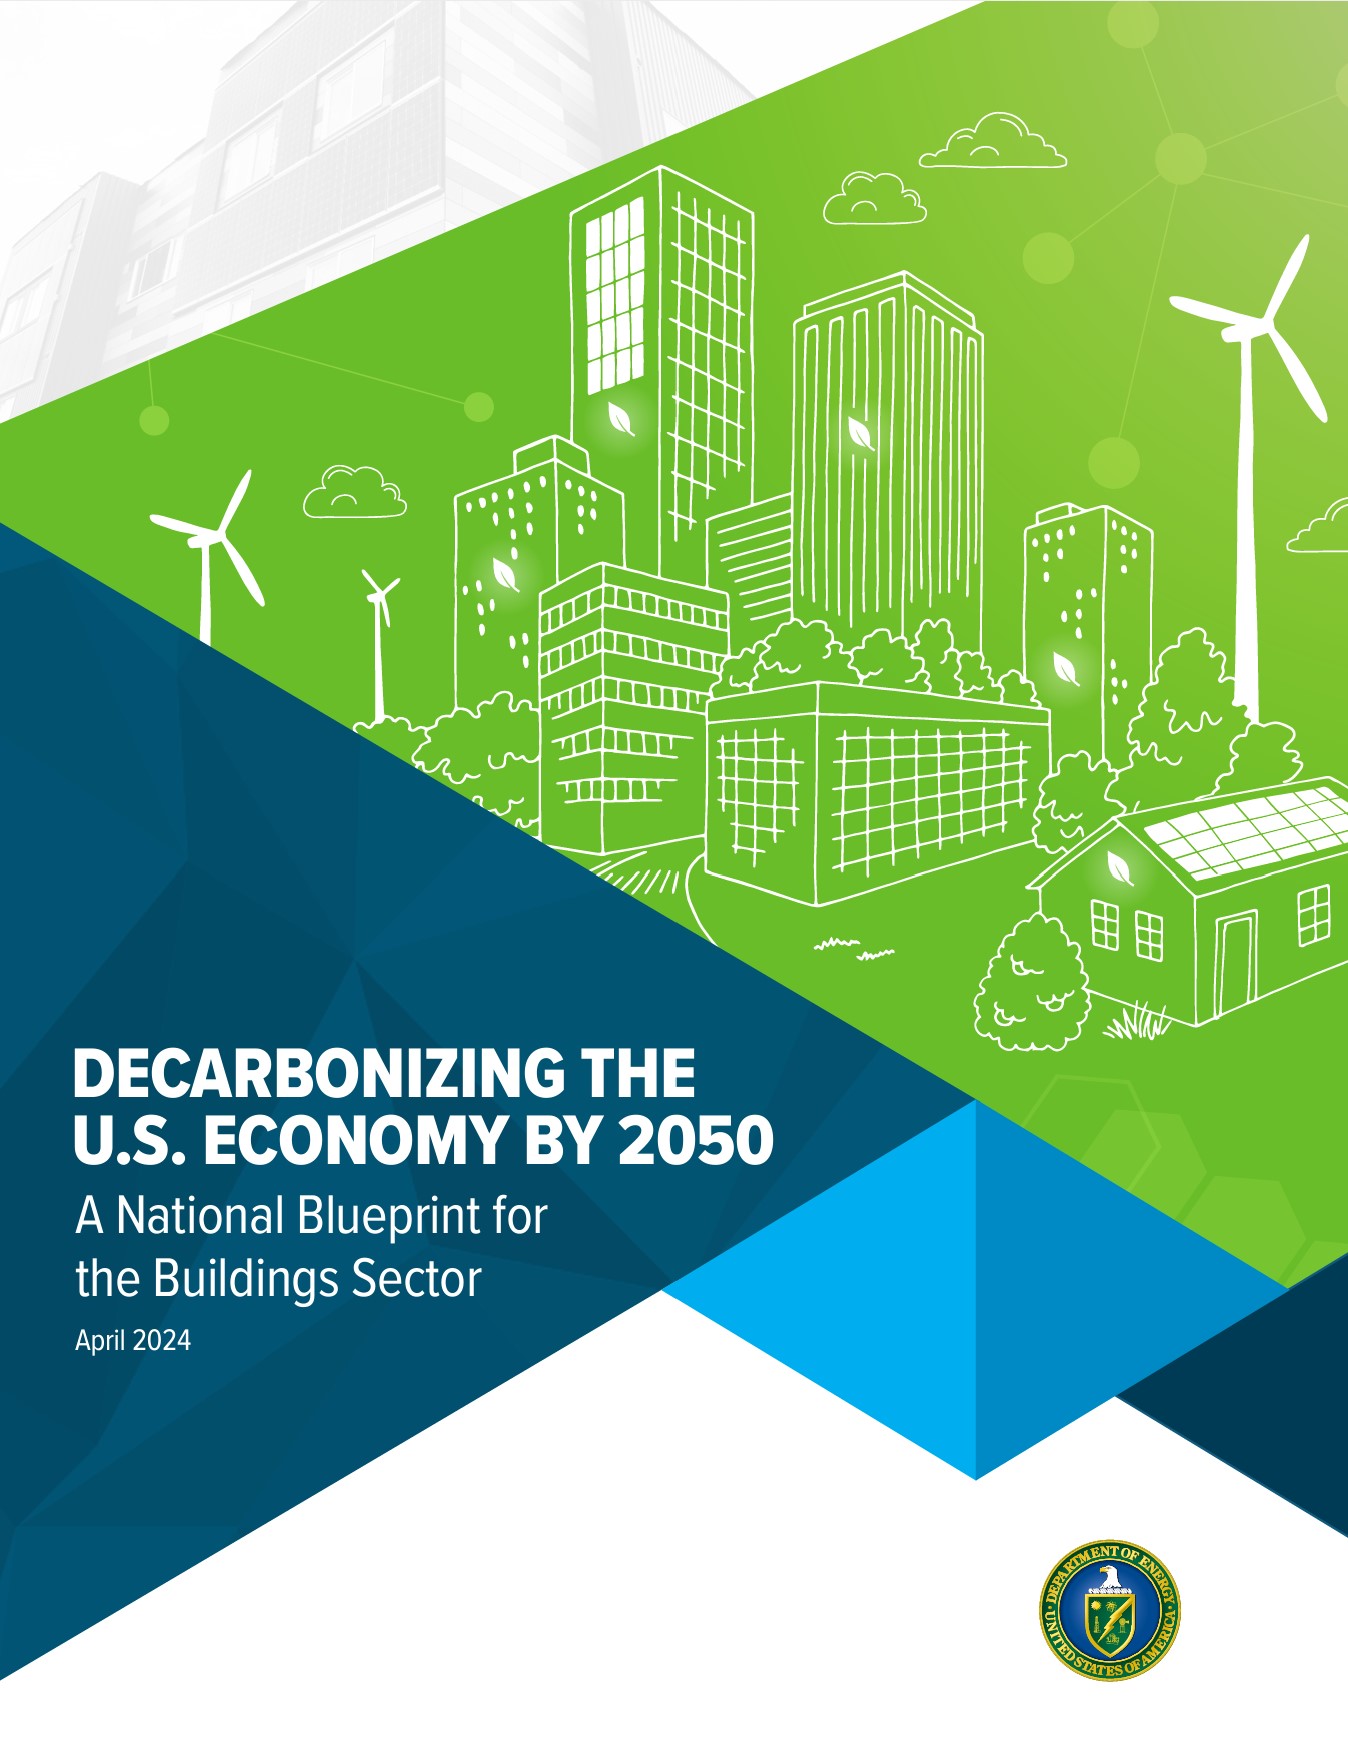 Decarbonizing the U.S. Economy by 2050: A National Blueprint for the Buildings Sector